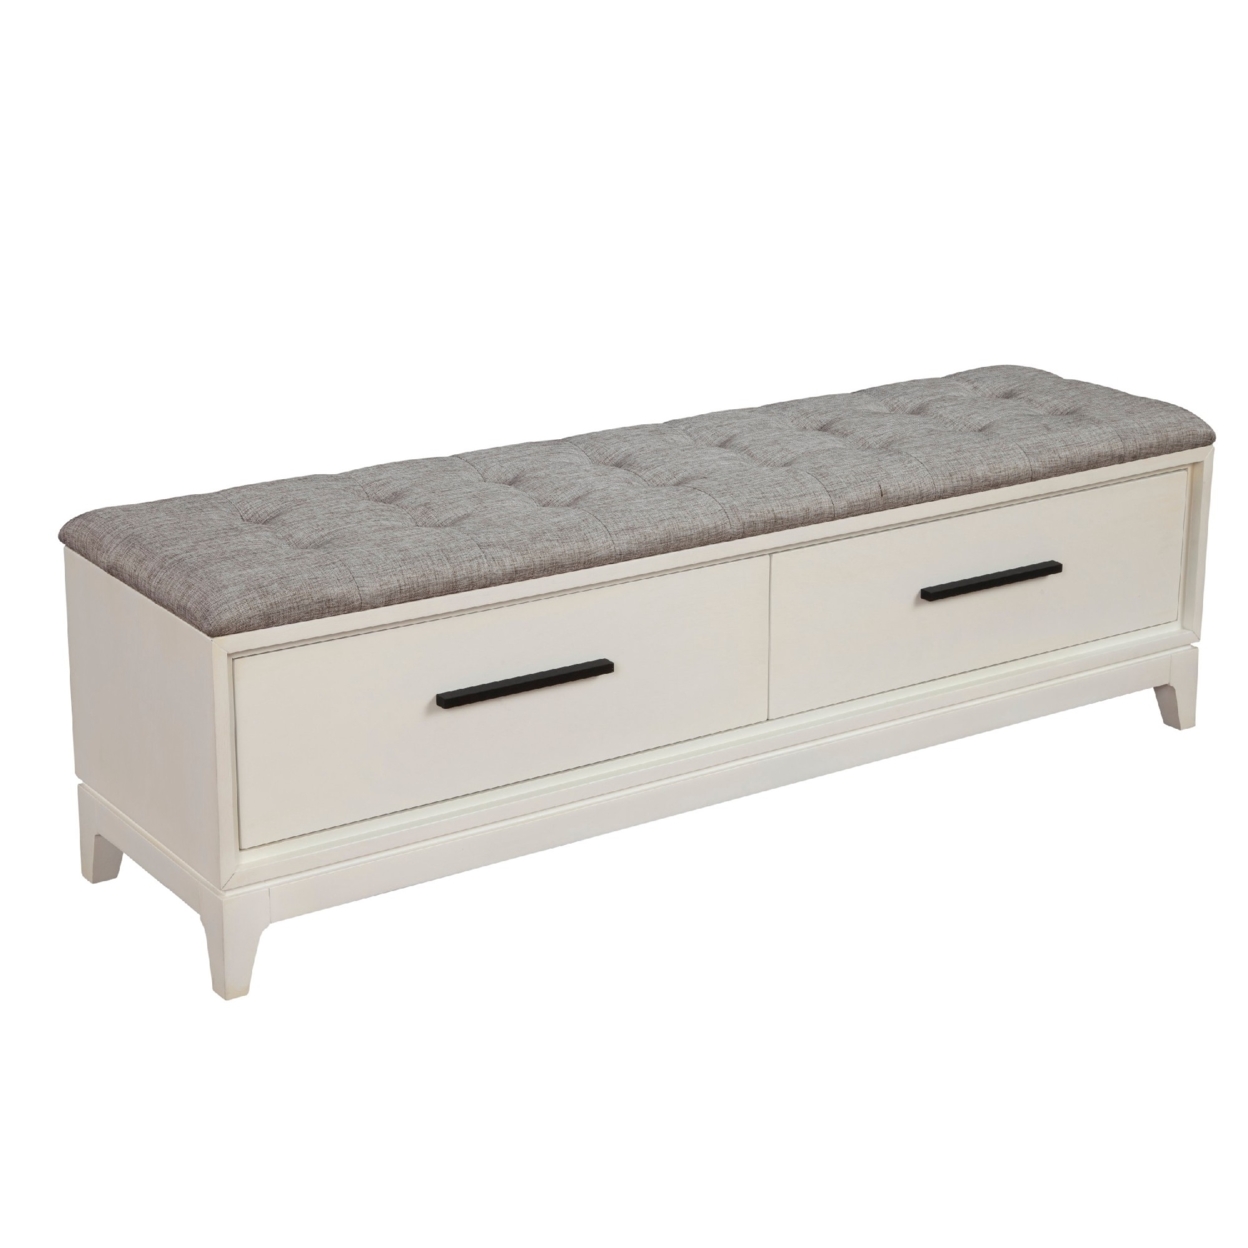 Bench With Fabric Padded Seat And 2 Drawers, Off White- Saltoro Sherpi